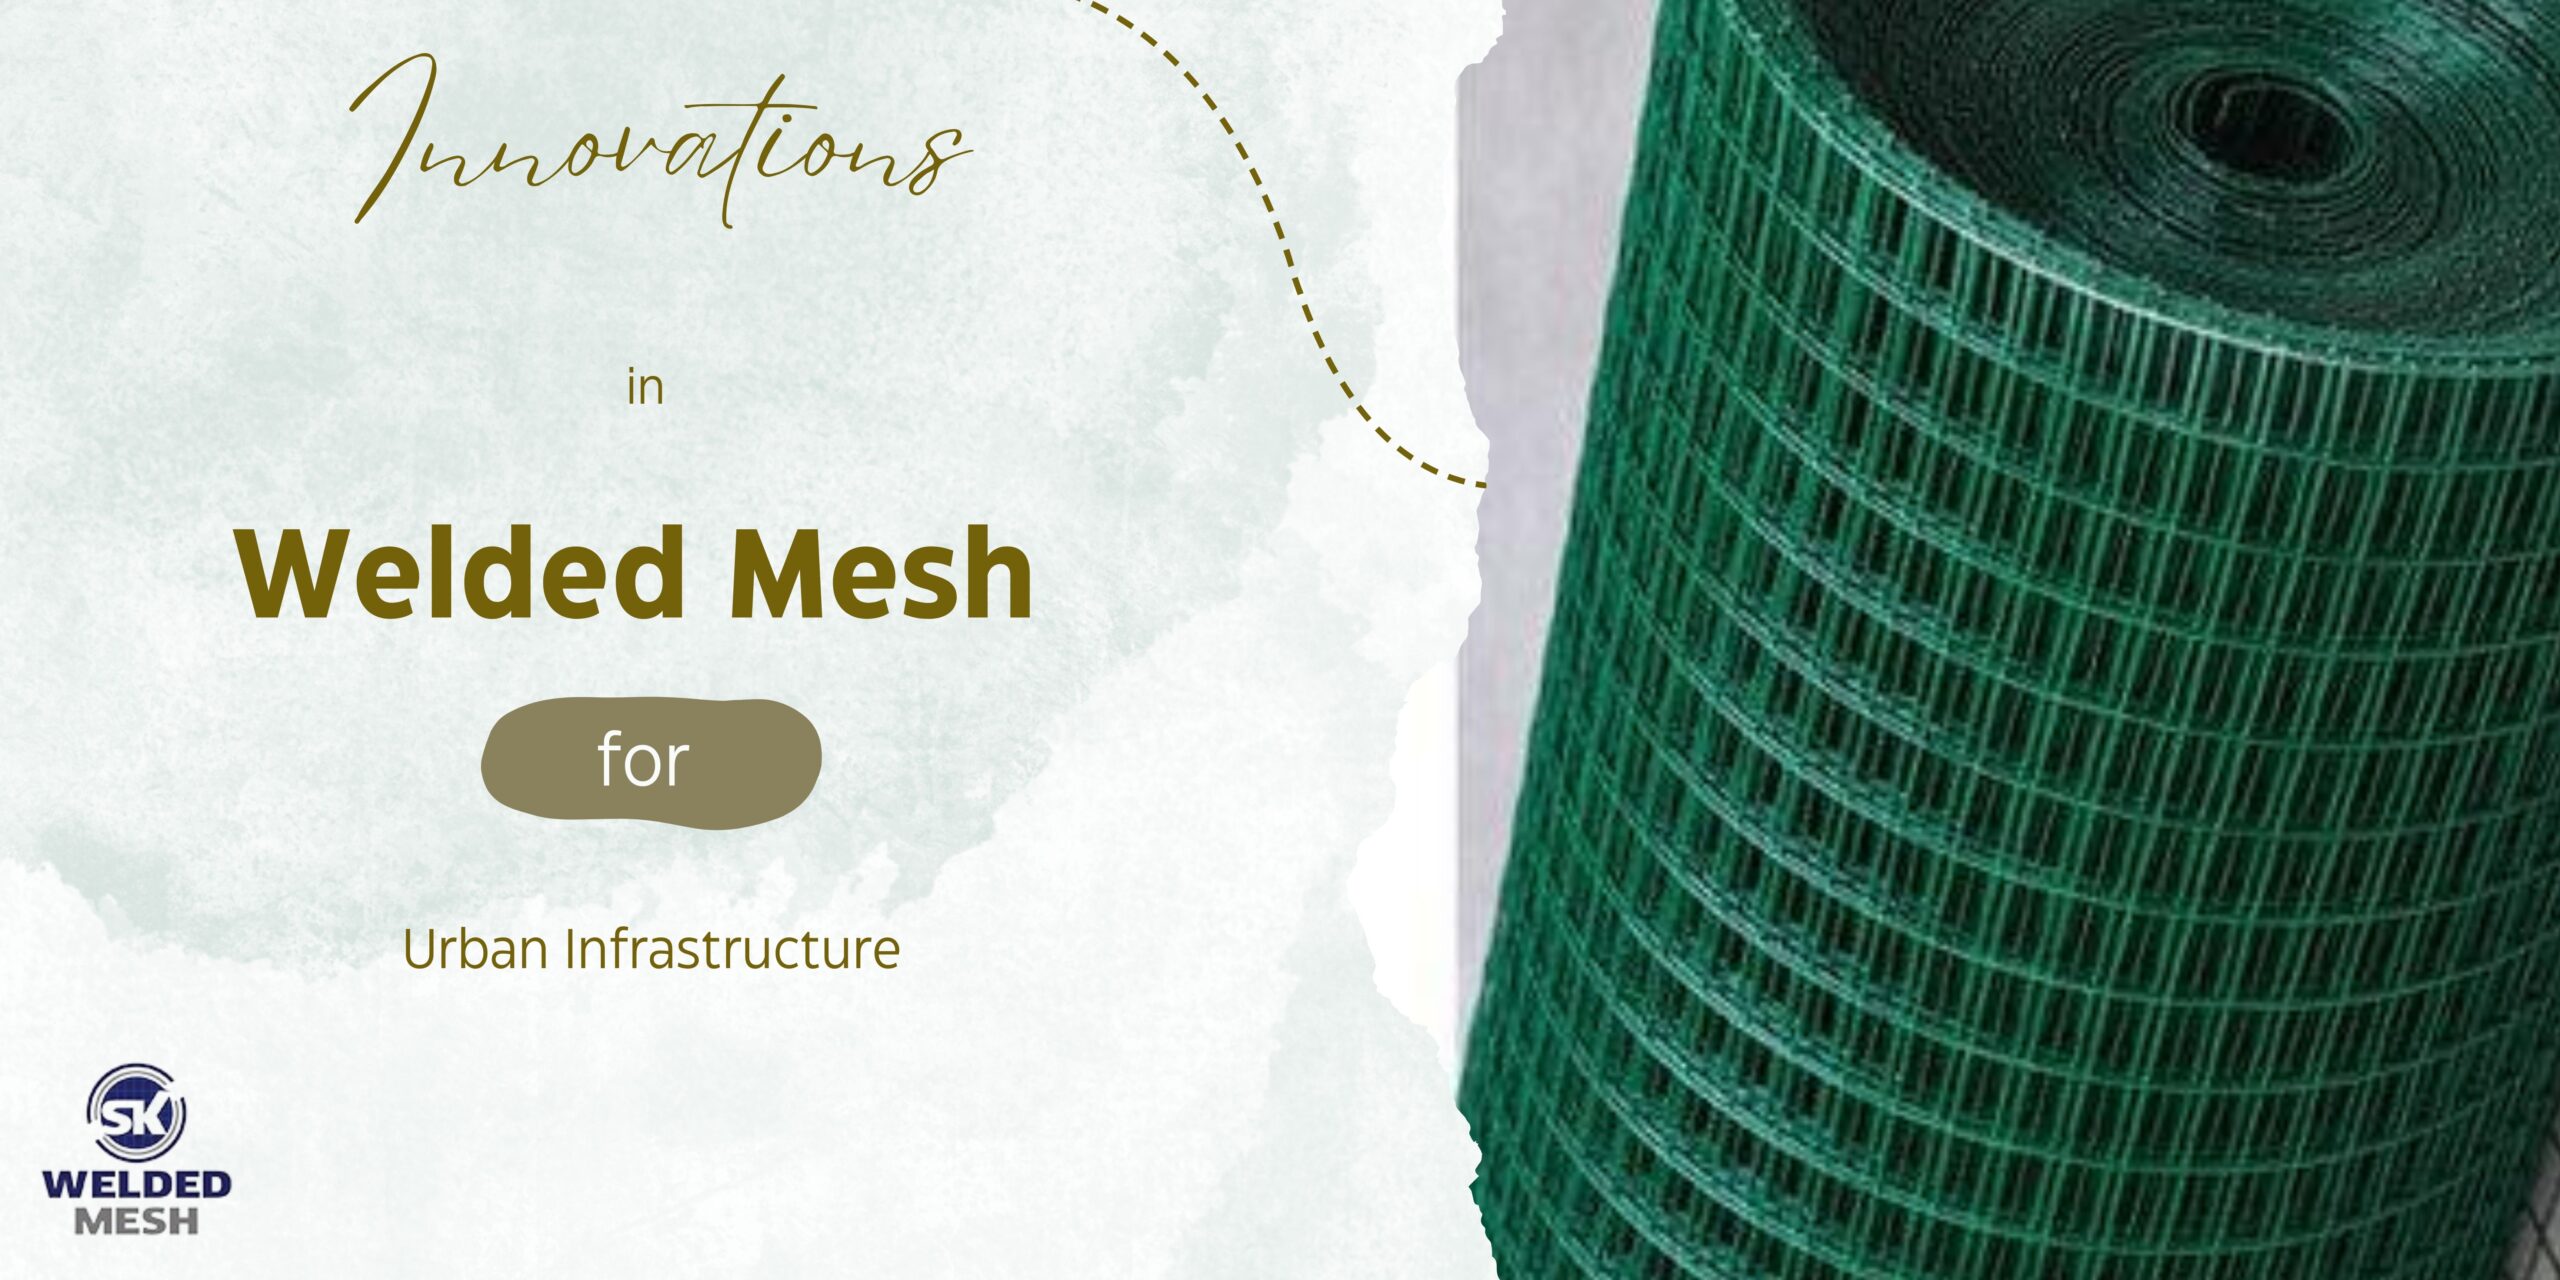 innovations in welded mesh for urban infrastructure